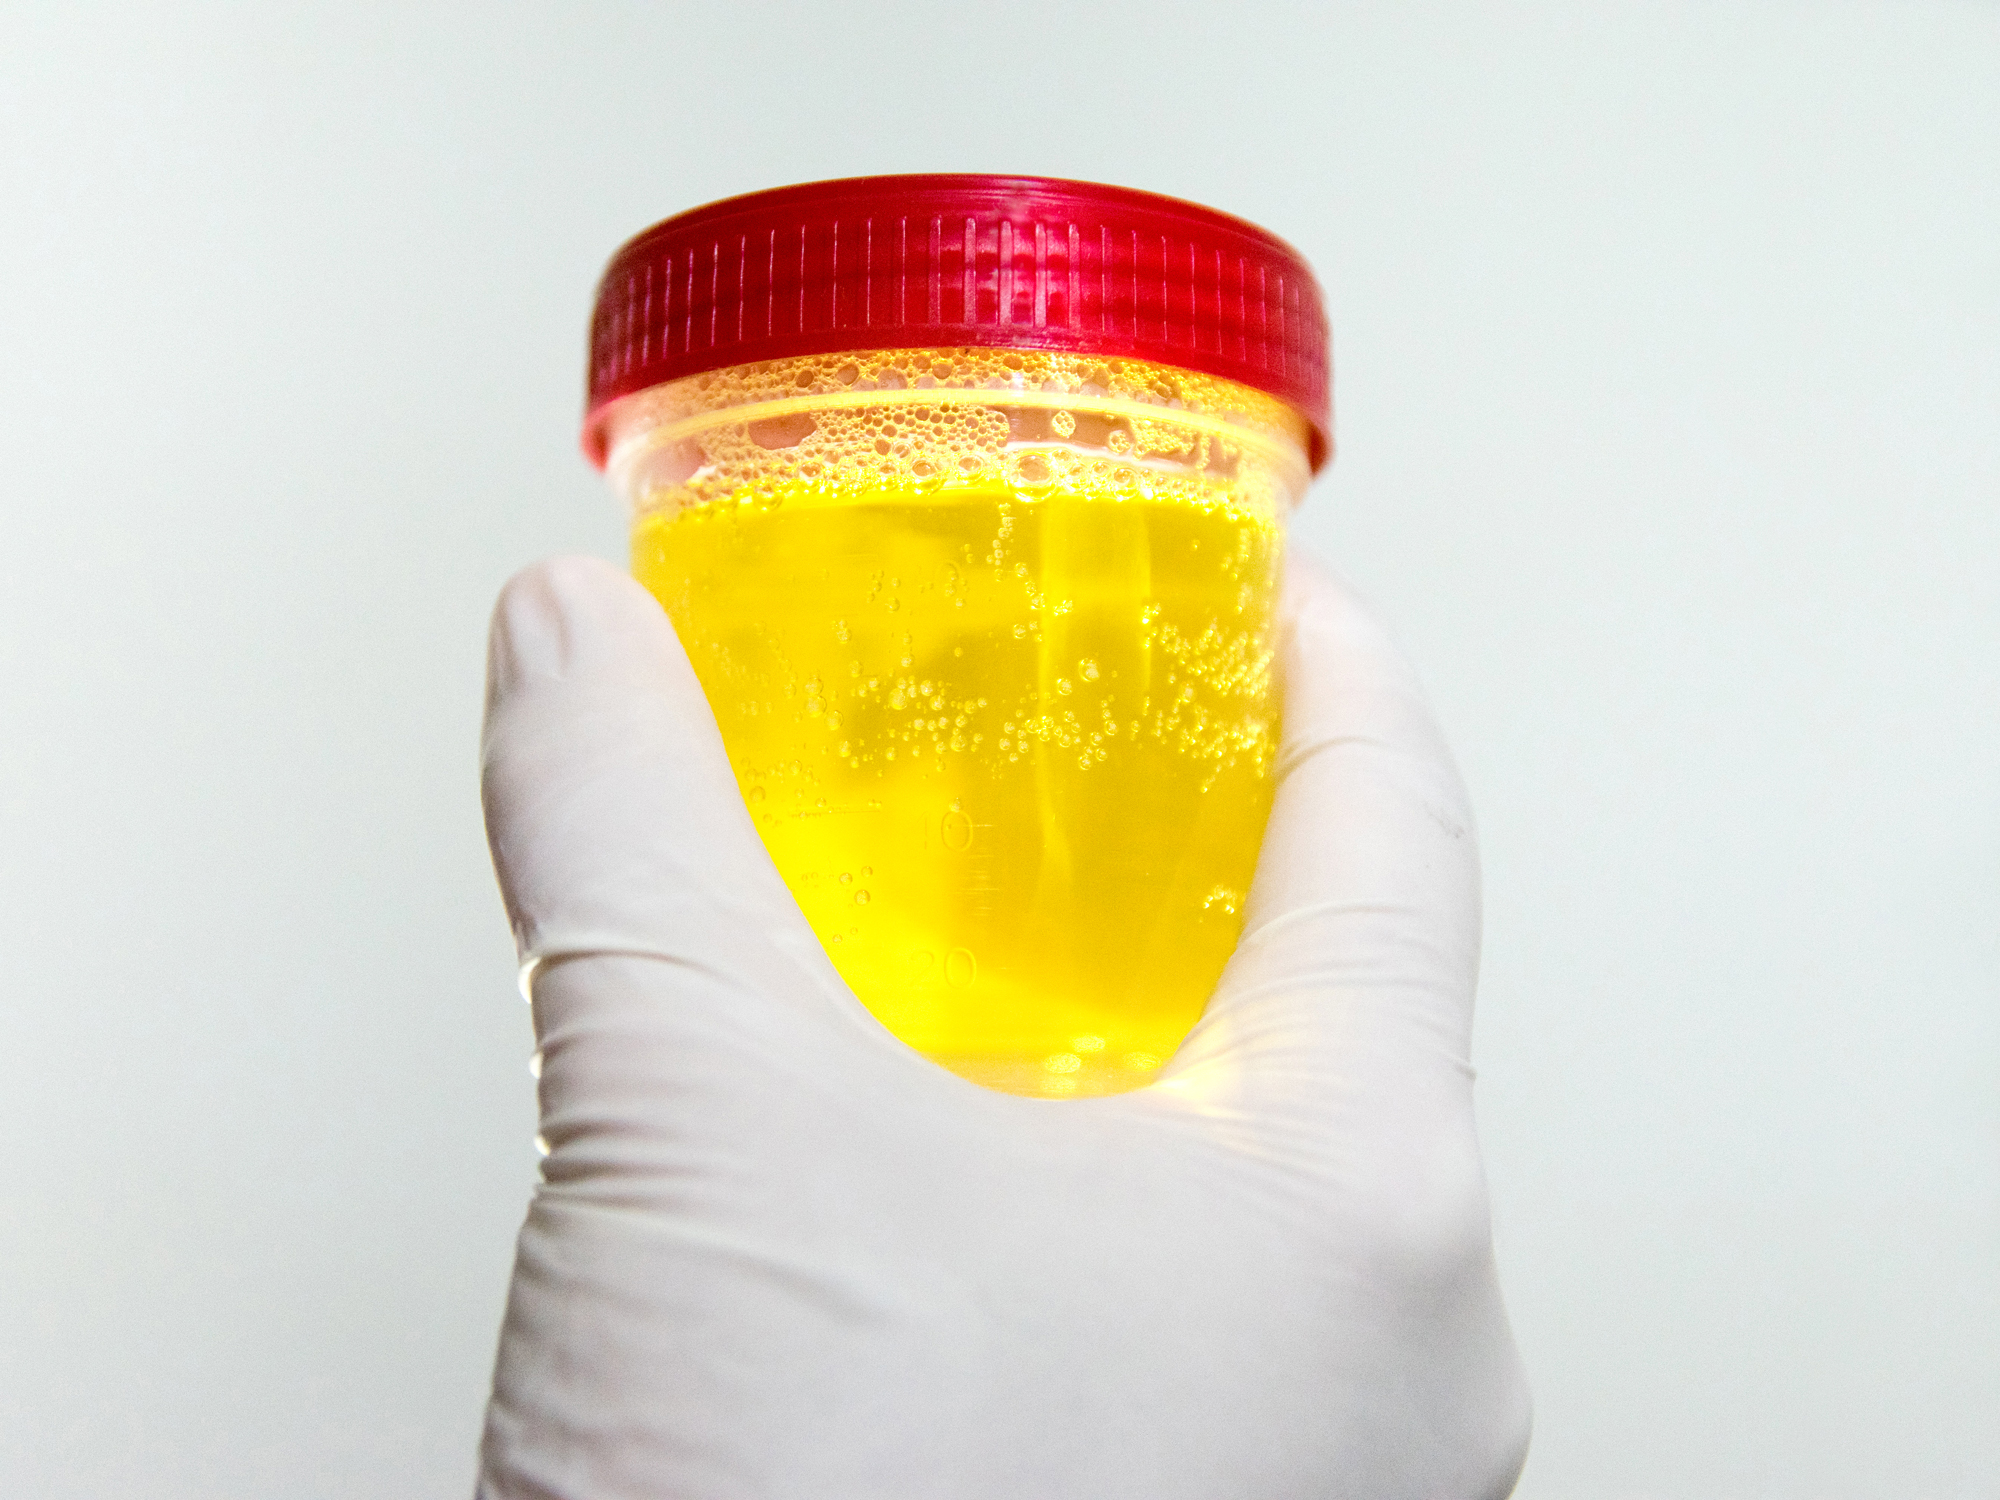 If your urine’s this color, see a doctor